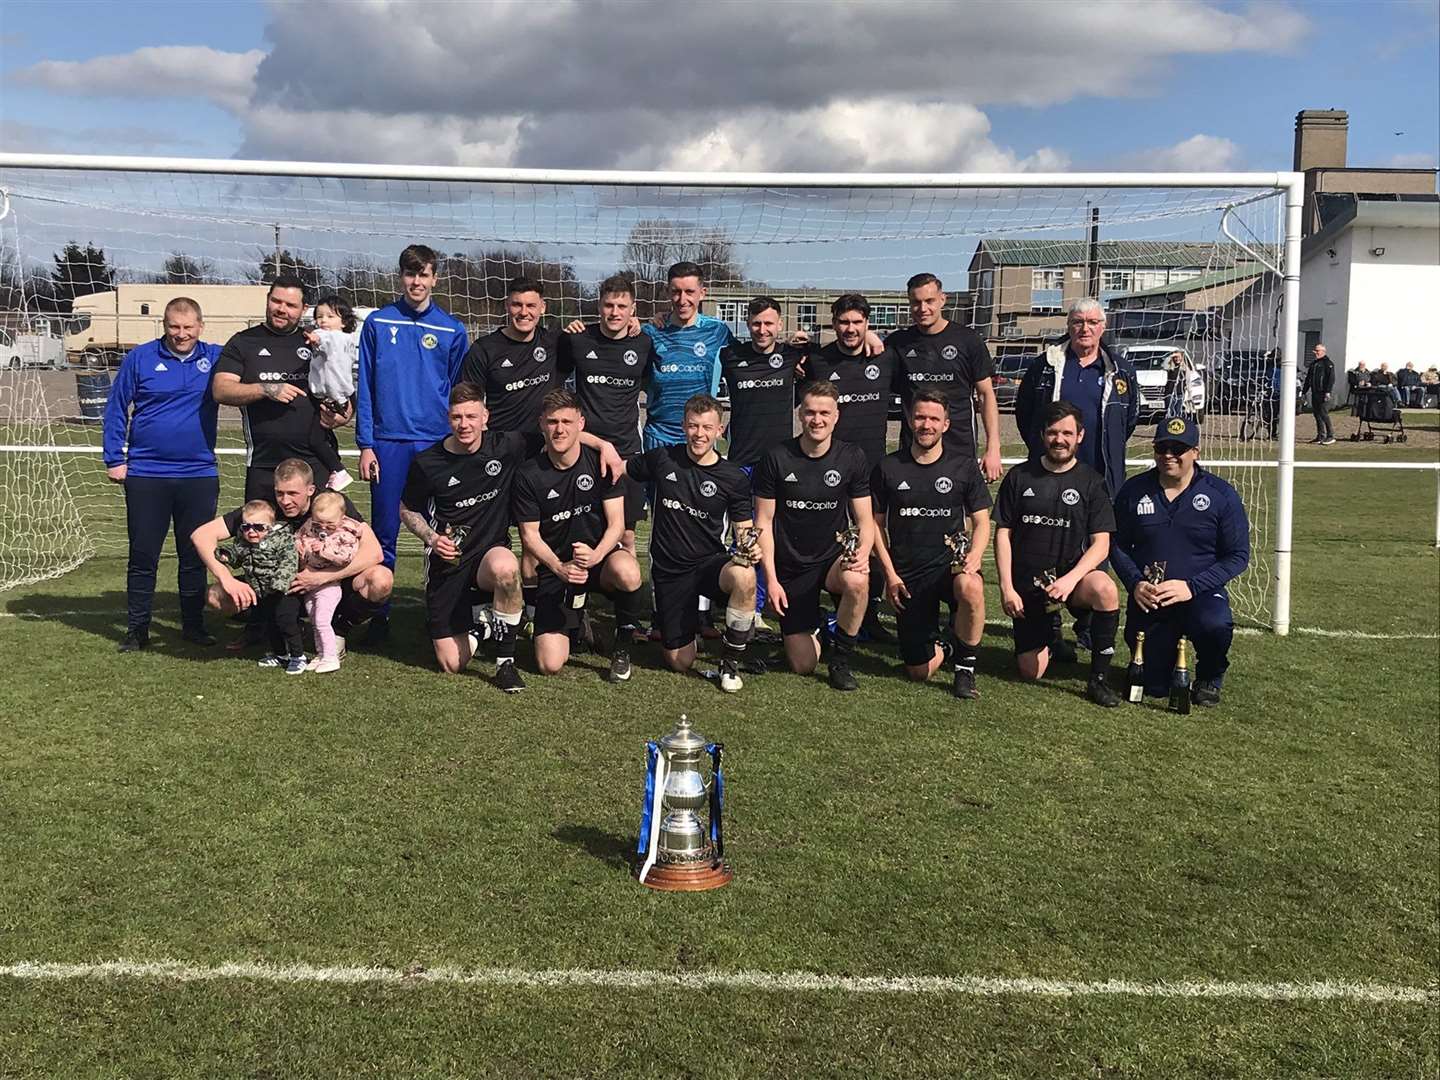 The Invergordon squad after securing the North Caledonian League title on Saturday. Picture: Will Clark